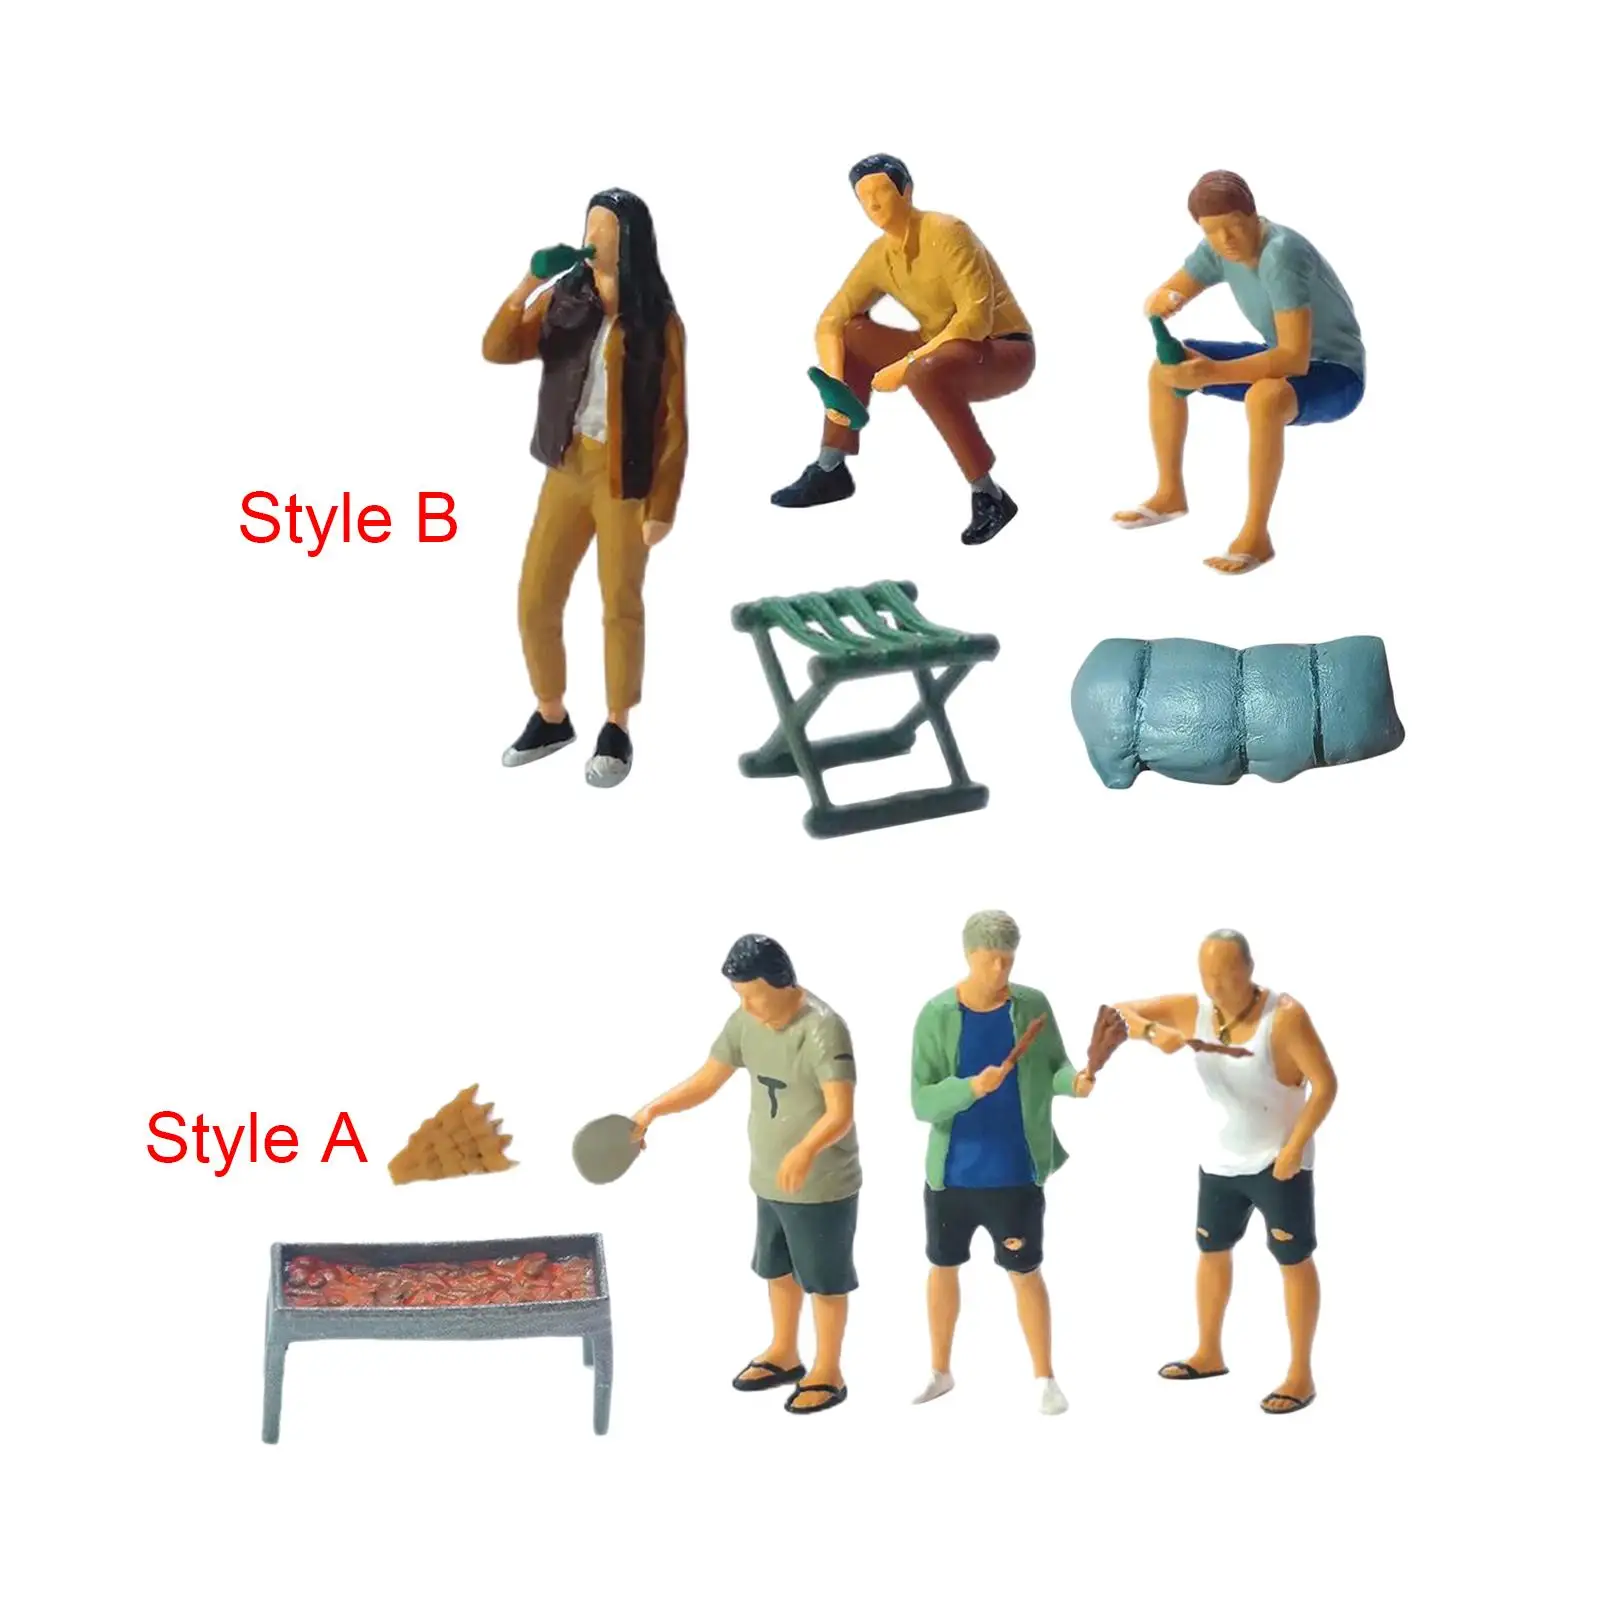 5 Pieces 1:64 Scale Tiny BBQ People Set Train Railway S Scale Sand Table Layout Decoration Diorama Scenery Miniature Decor